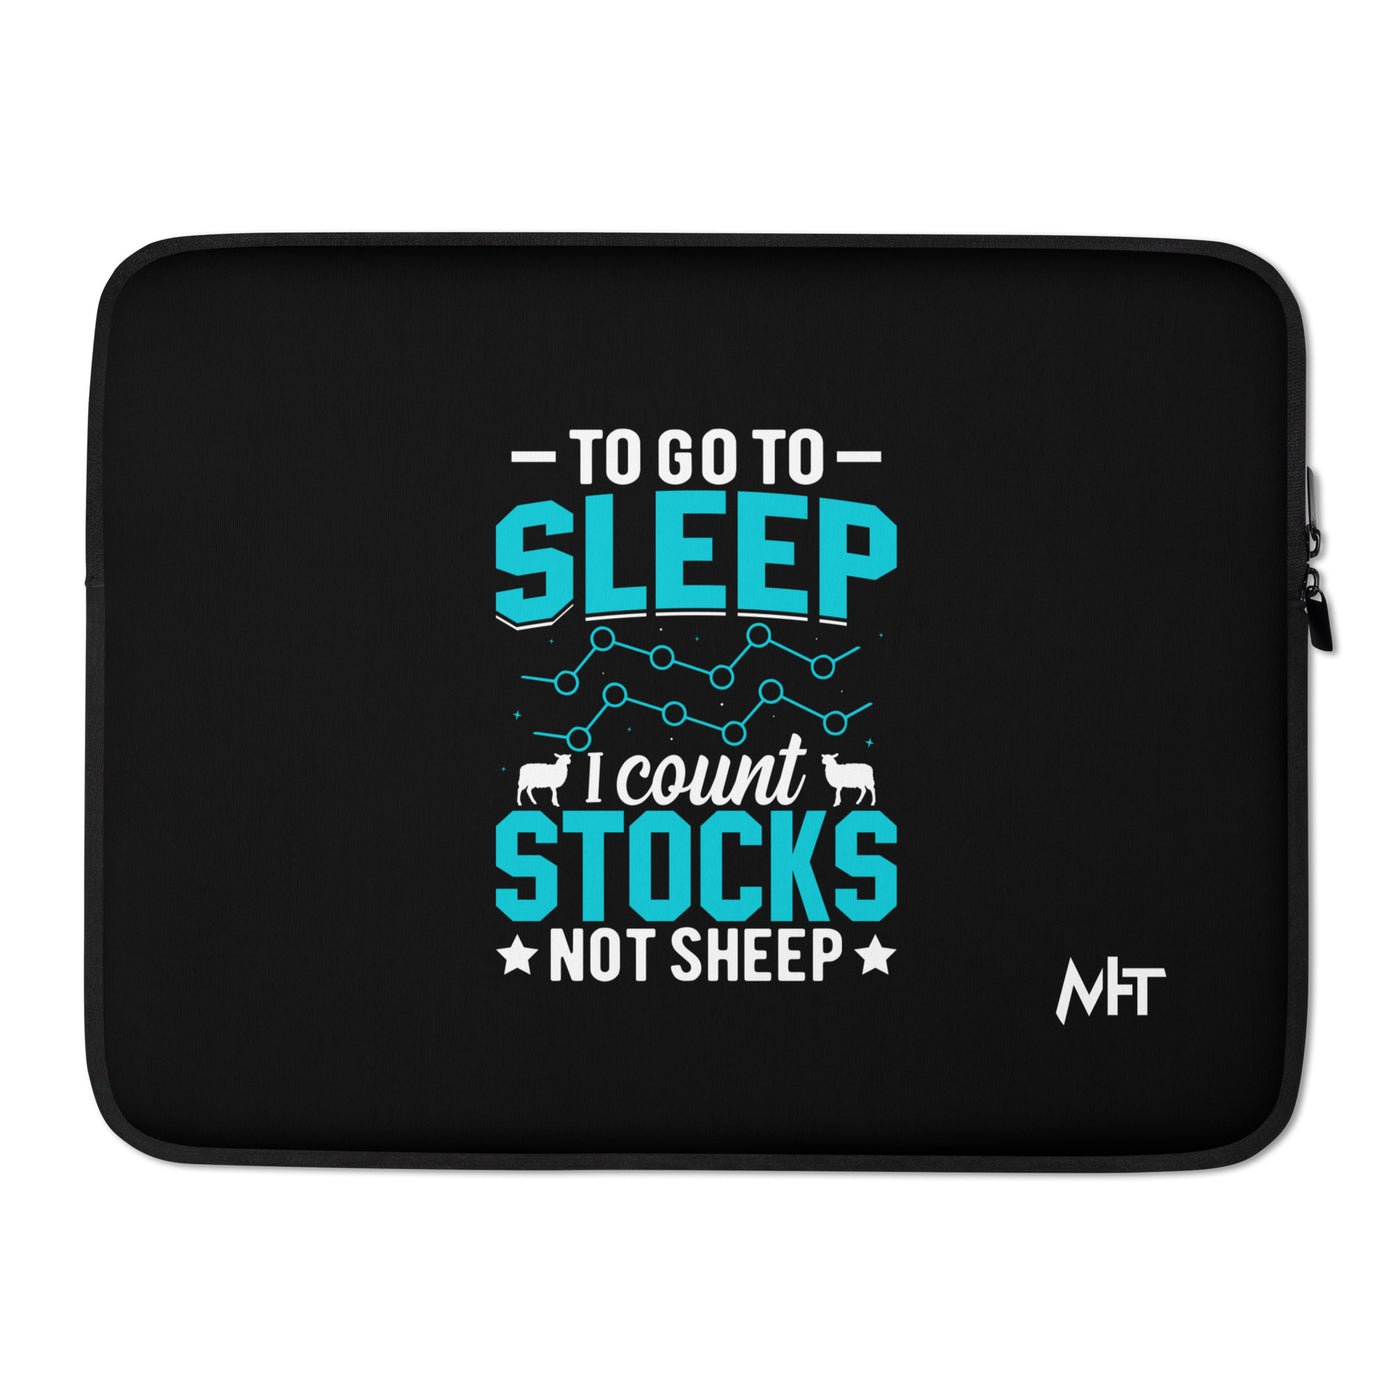 To go to sleep, I count stocks not sheep (DB) - Laptop Sleeve